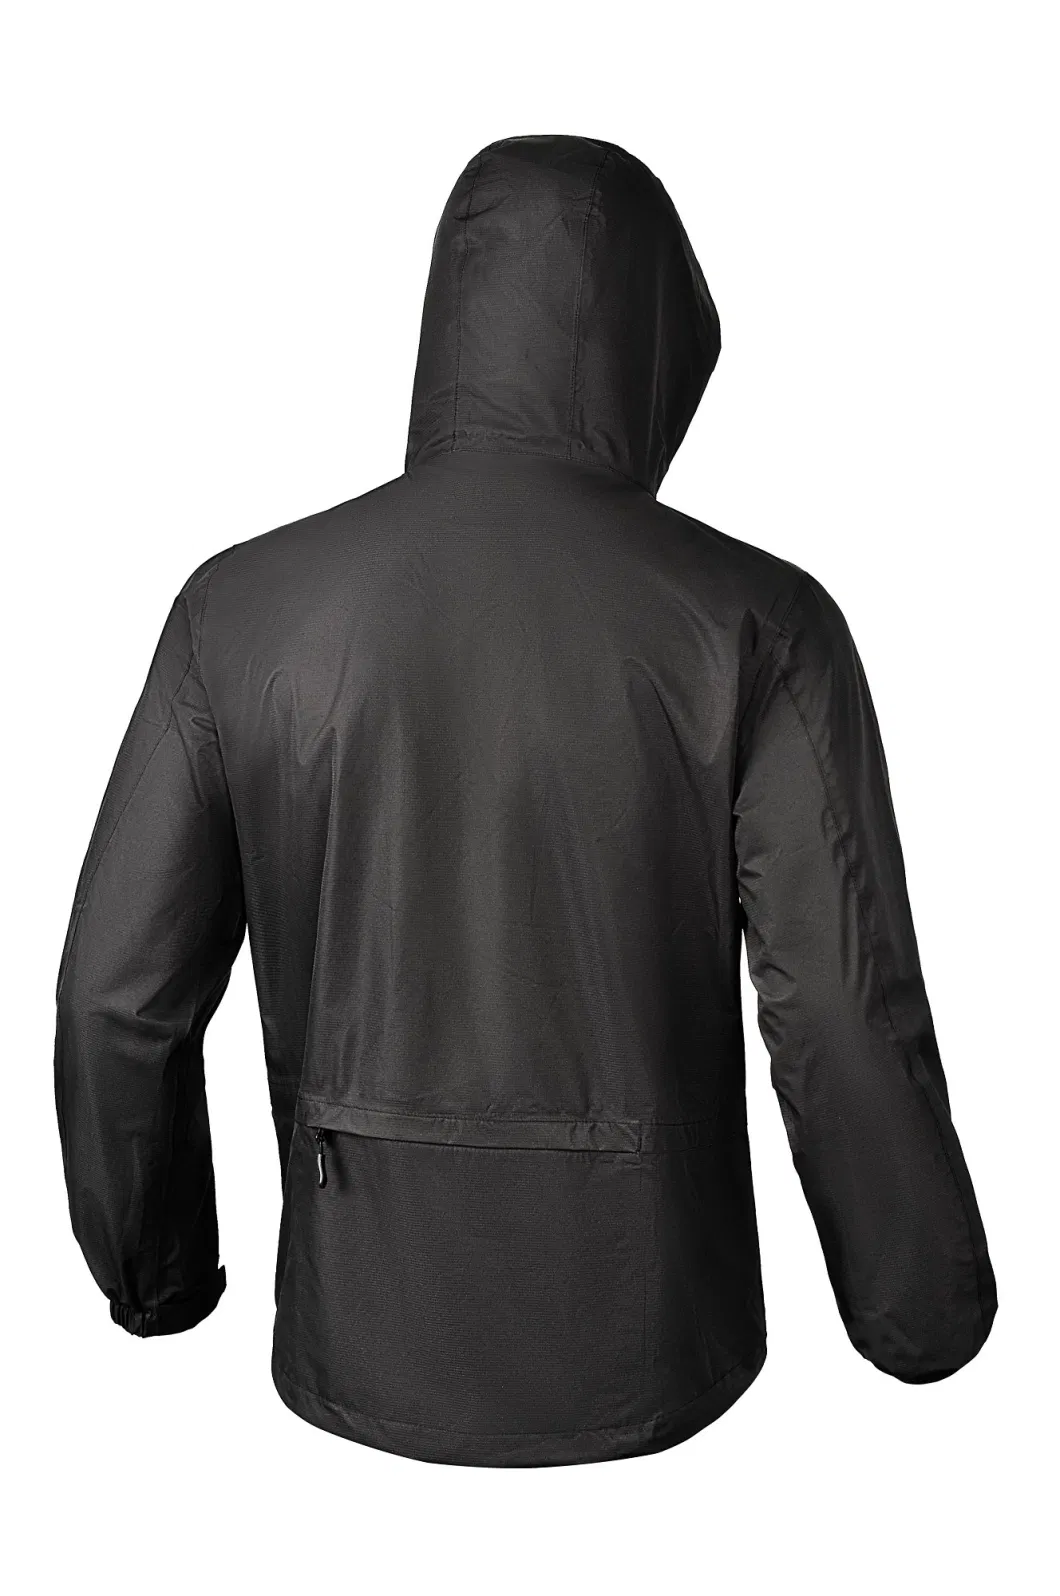 Highly Wind Resistant Windproof Lightweight Rain Jacket with Climbing Specific Features Clothes 5% off